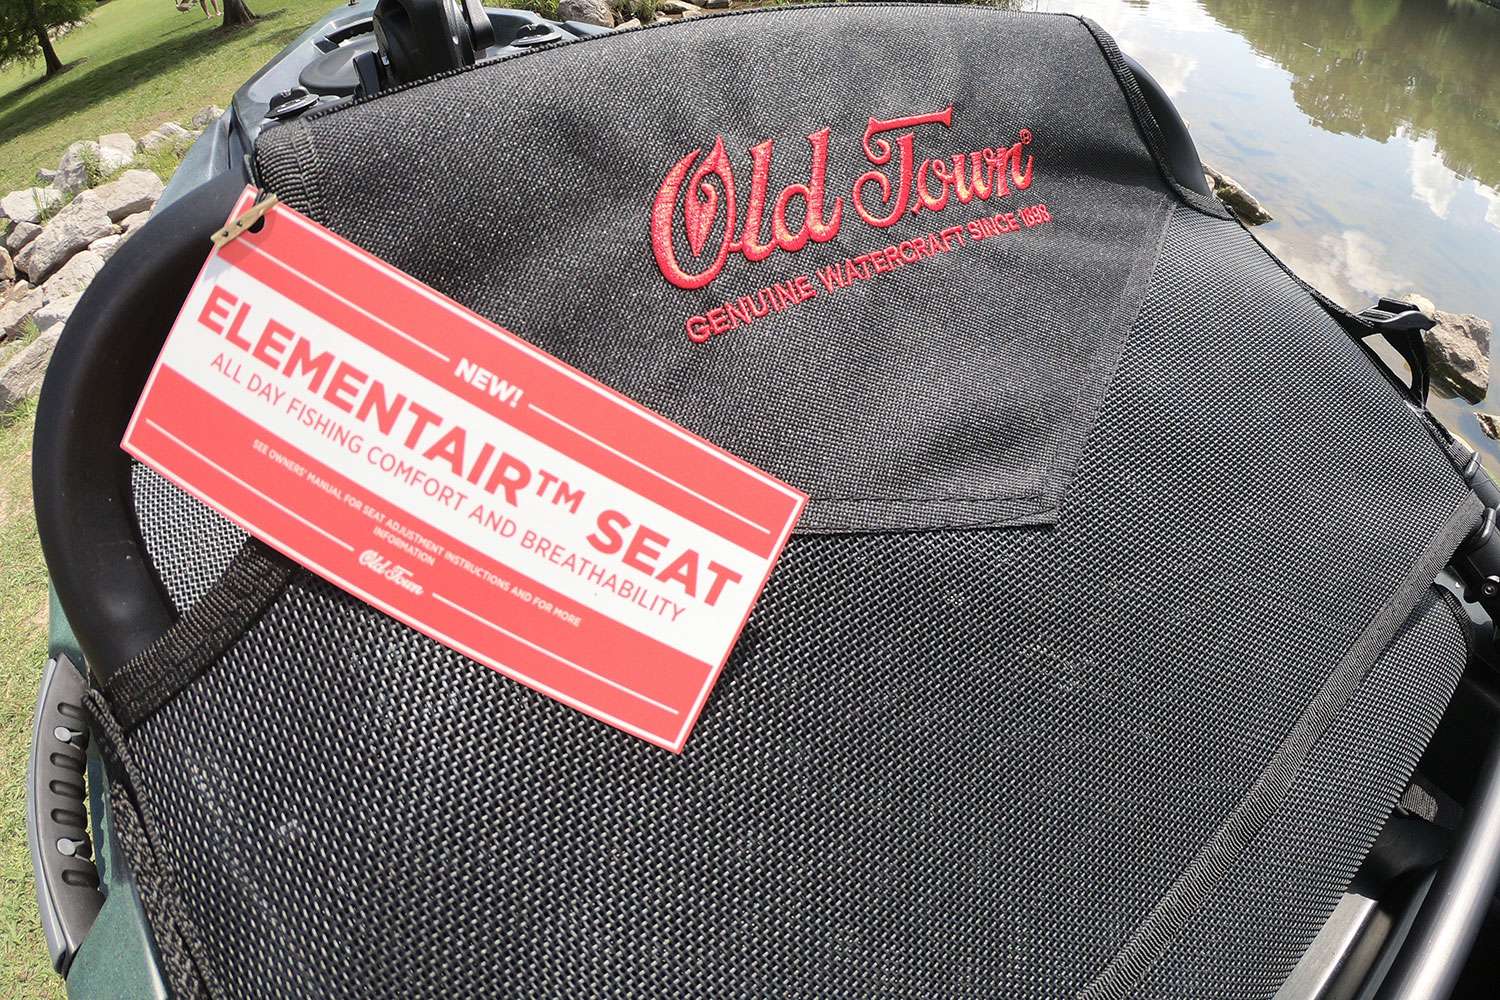 Sweat a lot? This seat will help keep air flowing through the mesh material. 